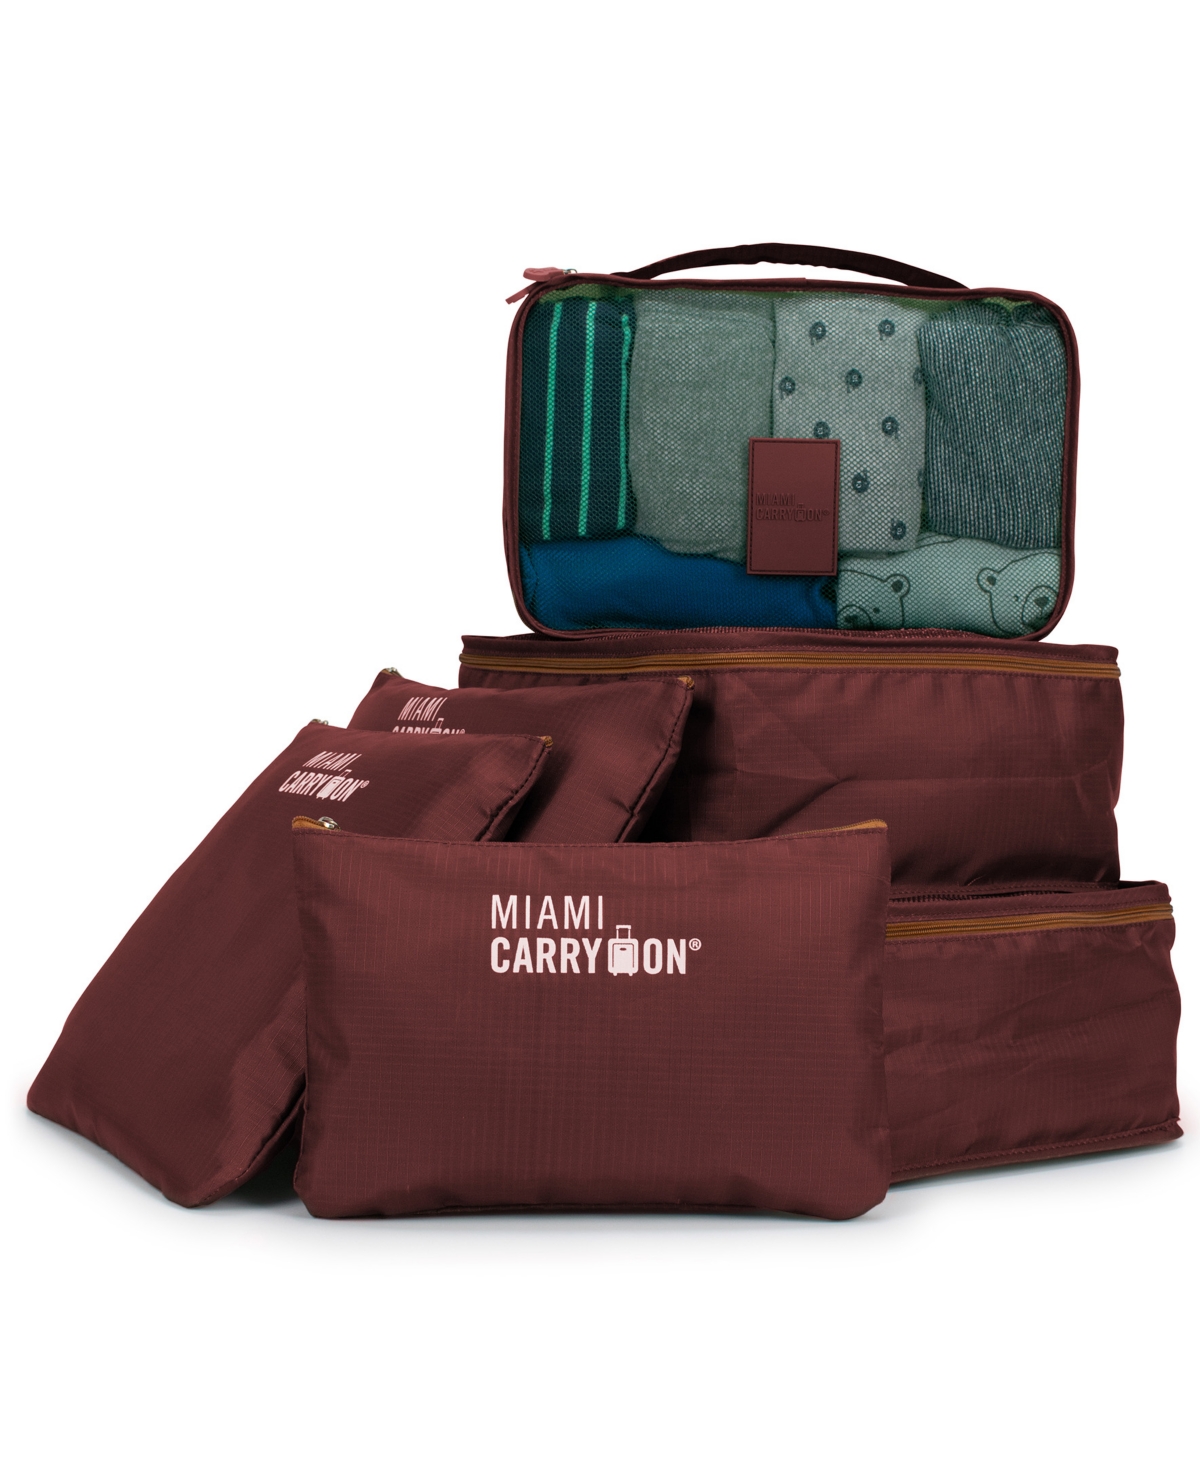 Miami Carryon Collins 6-pc. Packing Cube Set In Burgundy,tan